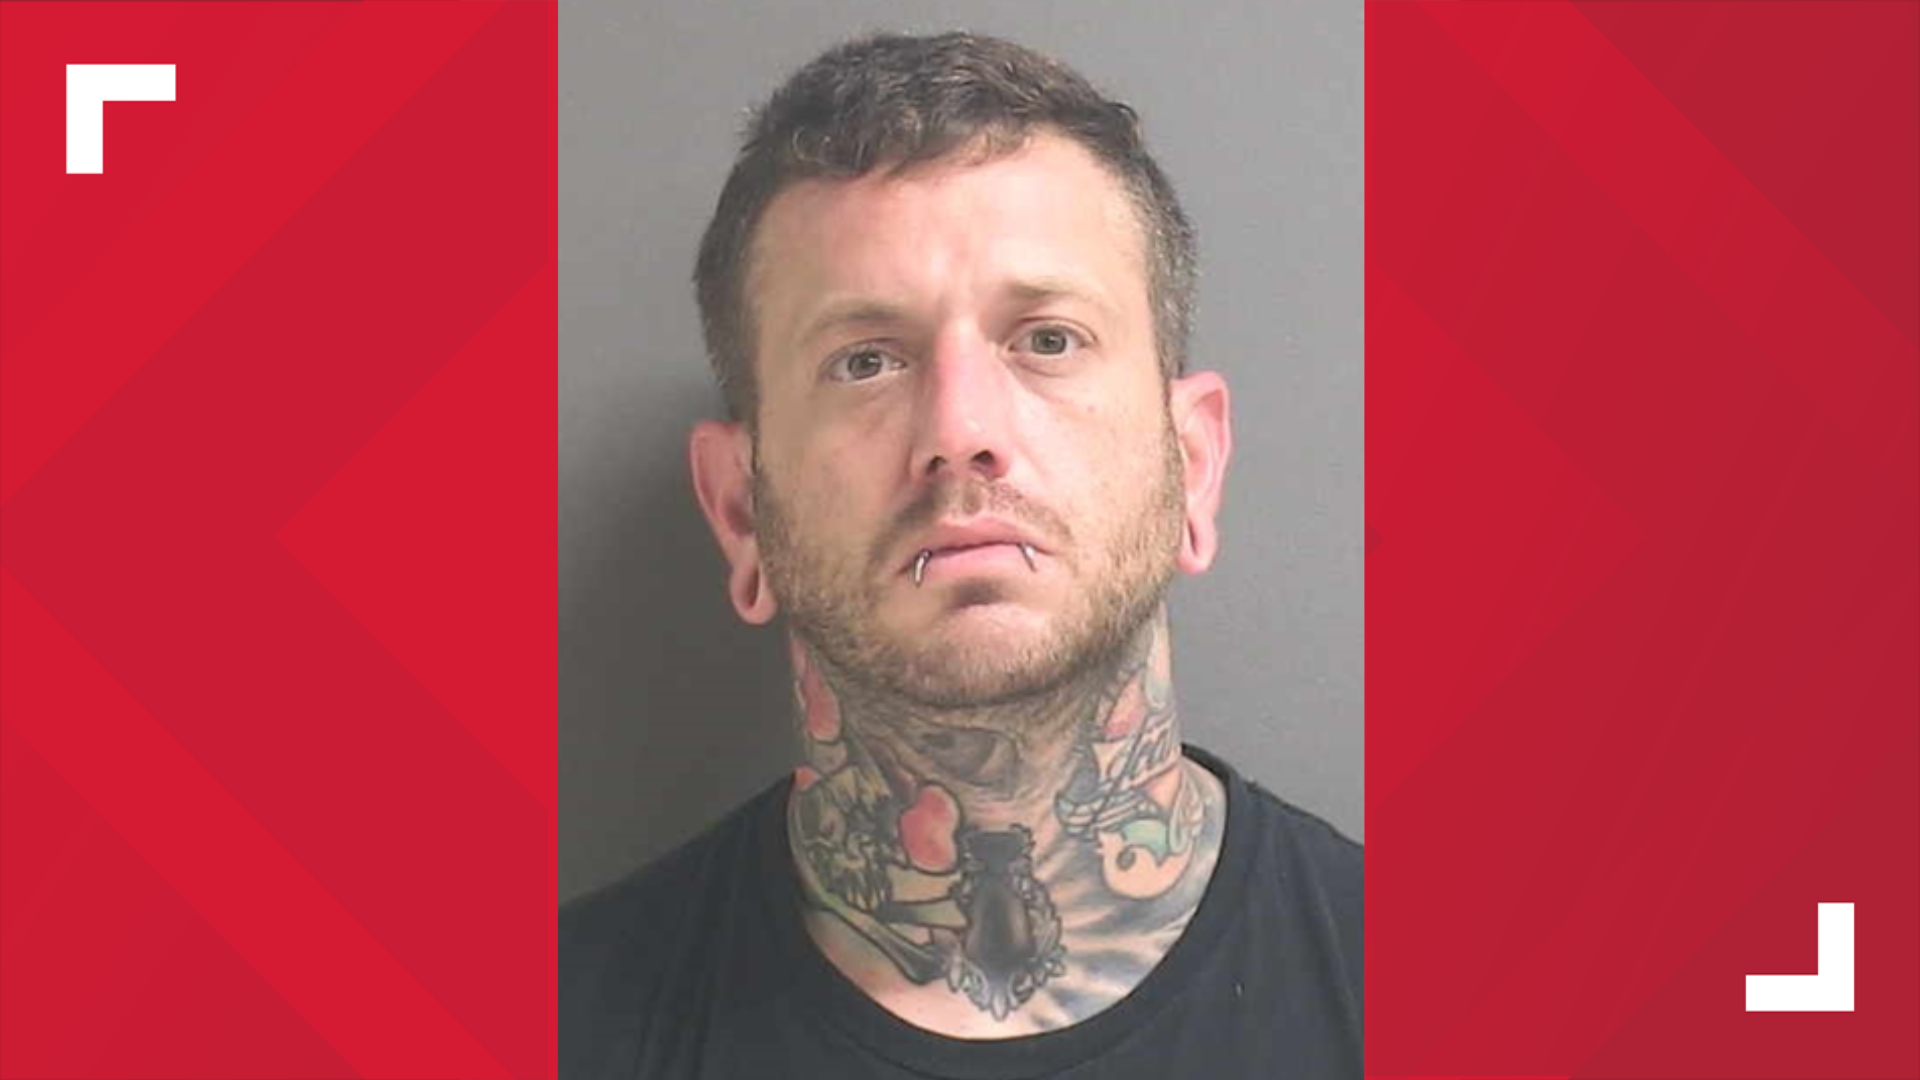 Jacksonville tattoo artist arrested following sexual battery accusations  after dozens of women come forward on social media  firstcoastnewscom